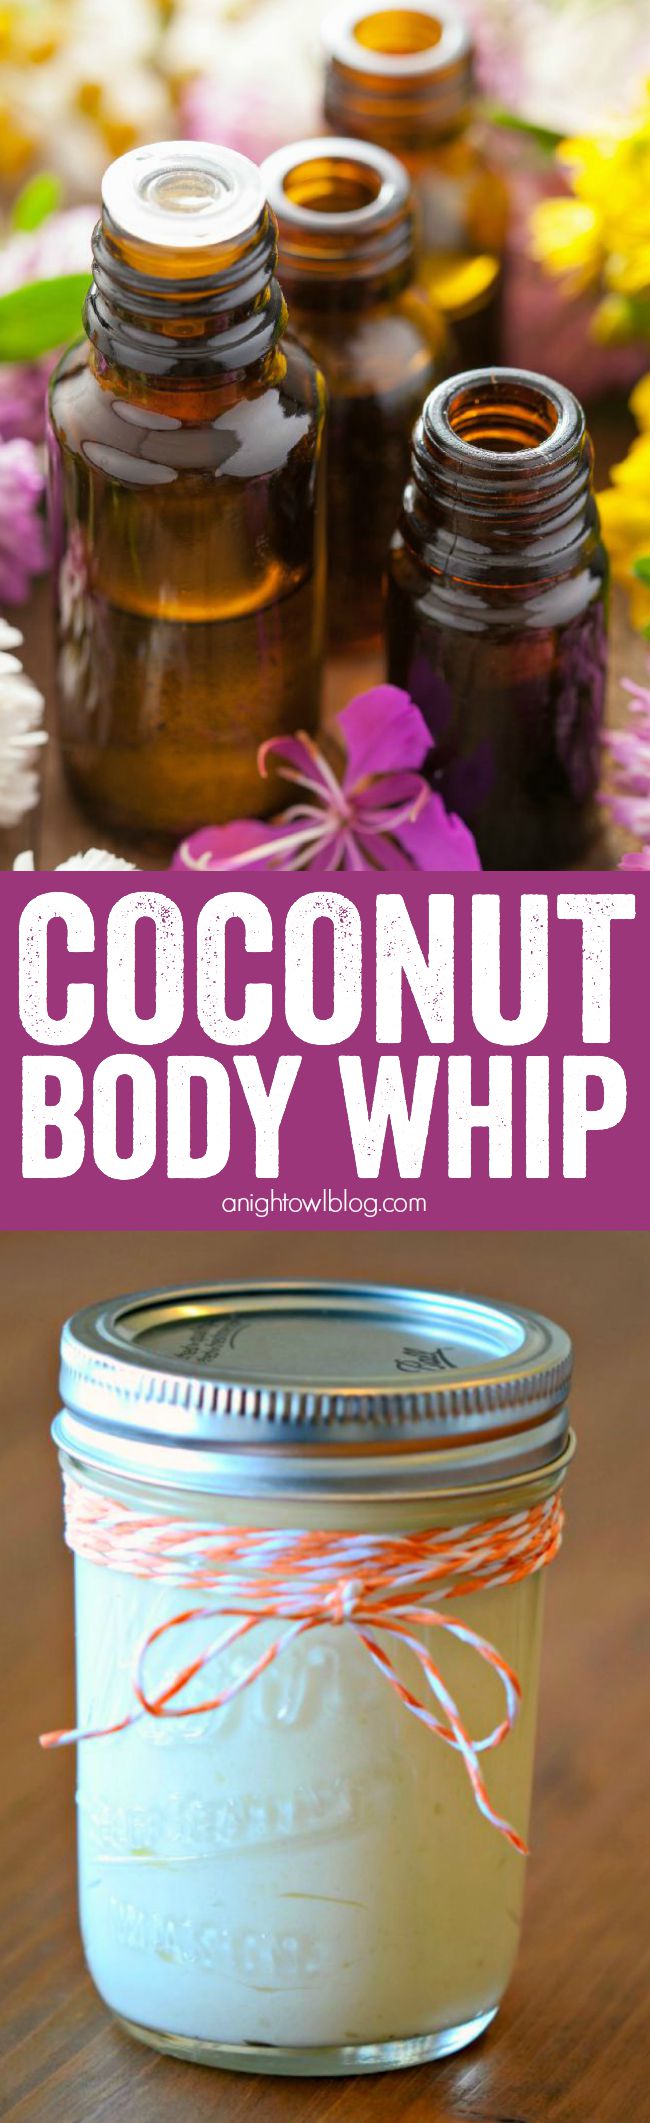 DIY Coconut Body Whip - a silky, light-weight moisturizer perfect for everyday use for a delightful mind-body experience.